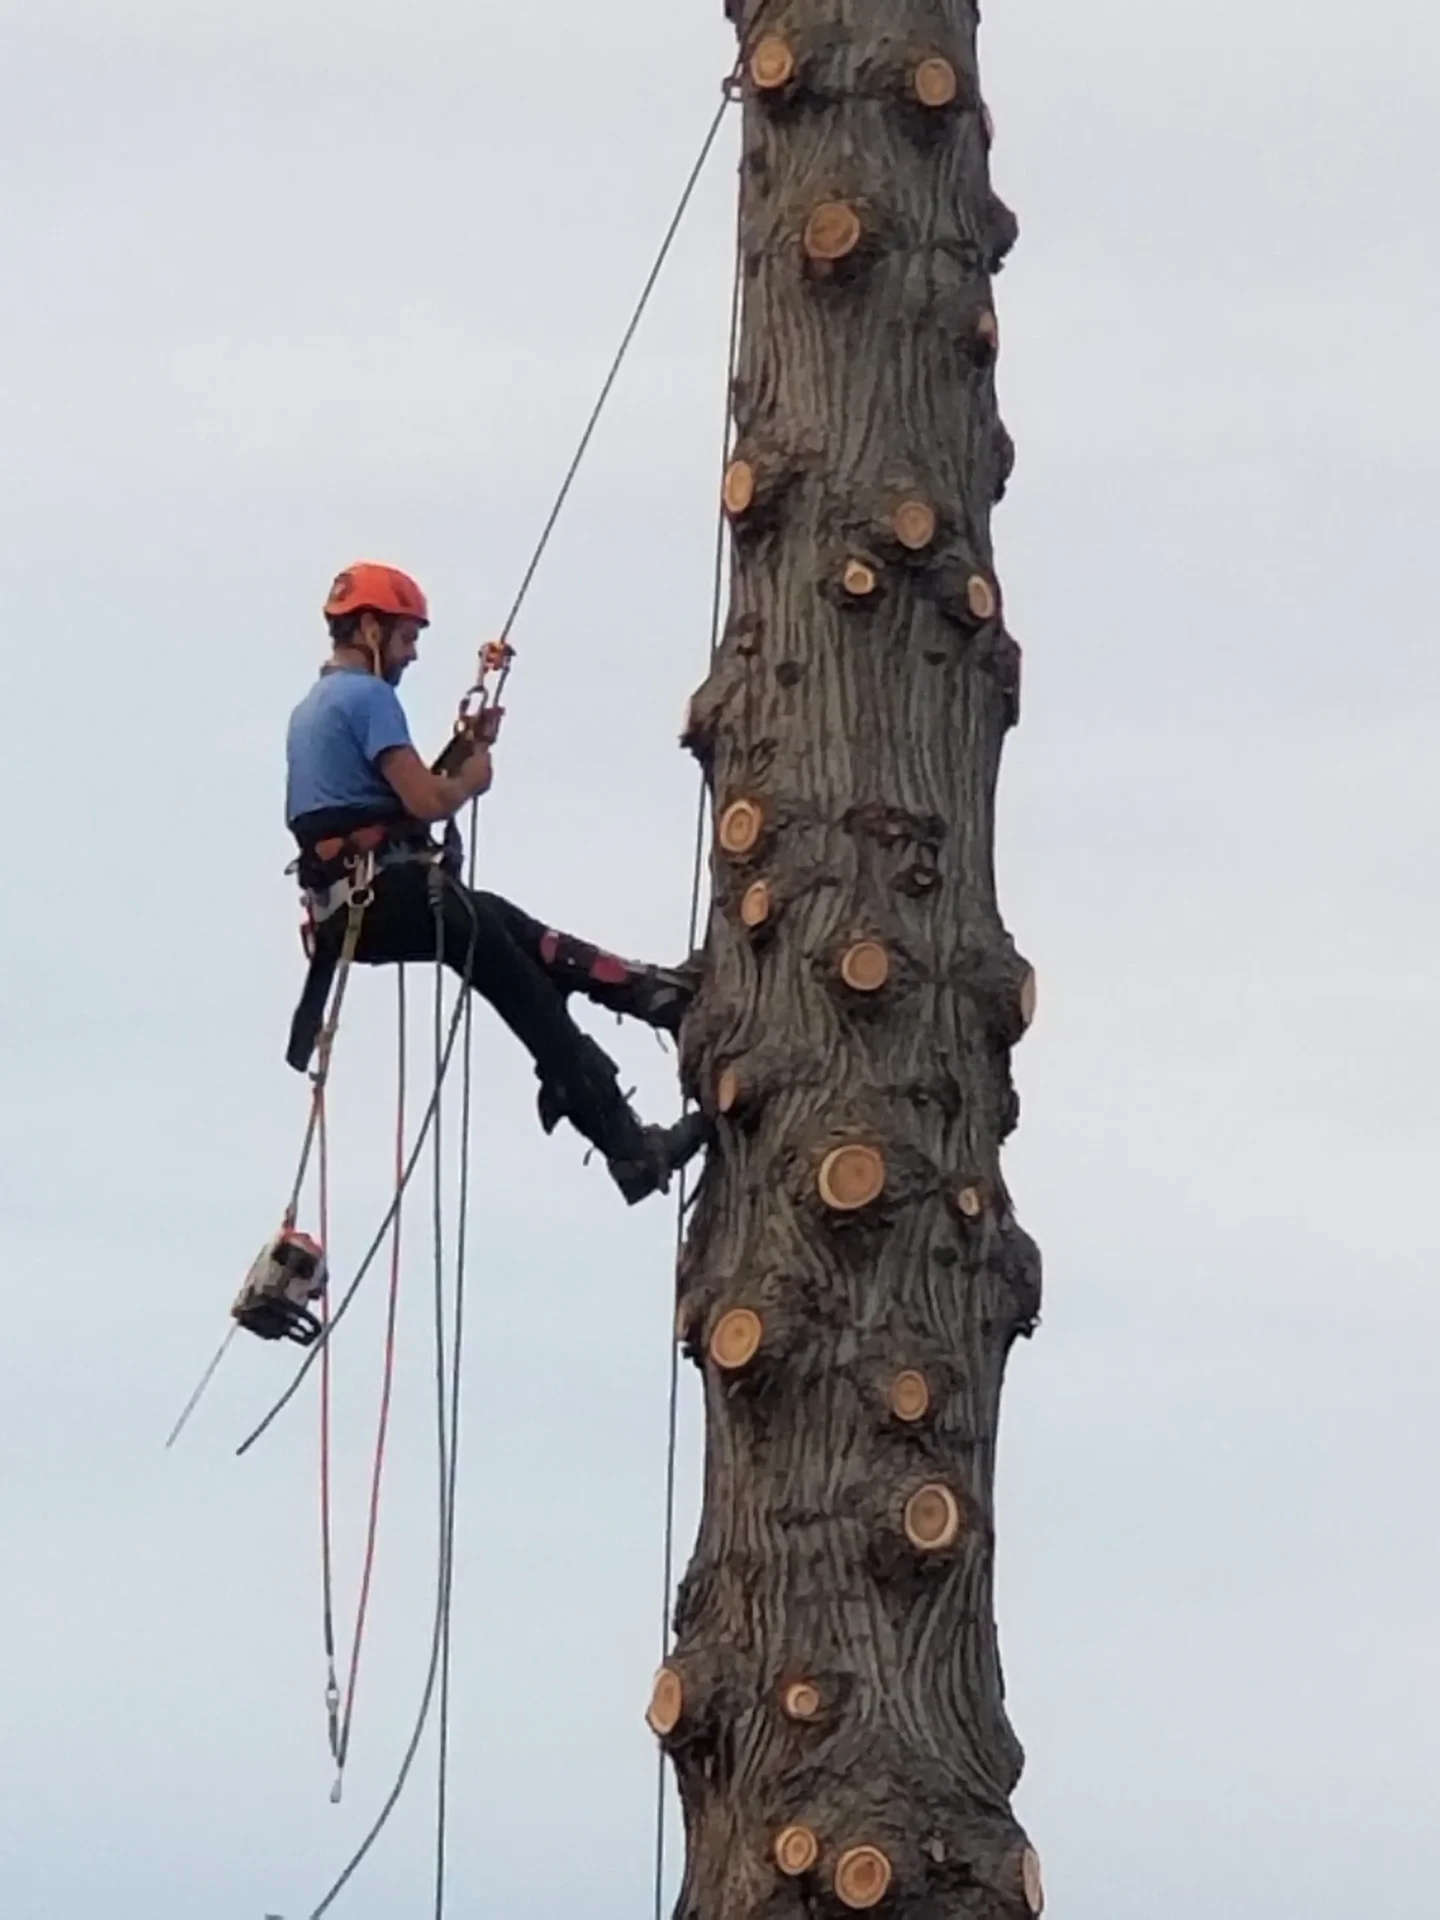 A man is climbing up the side of a tree.